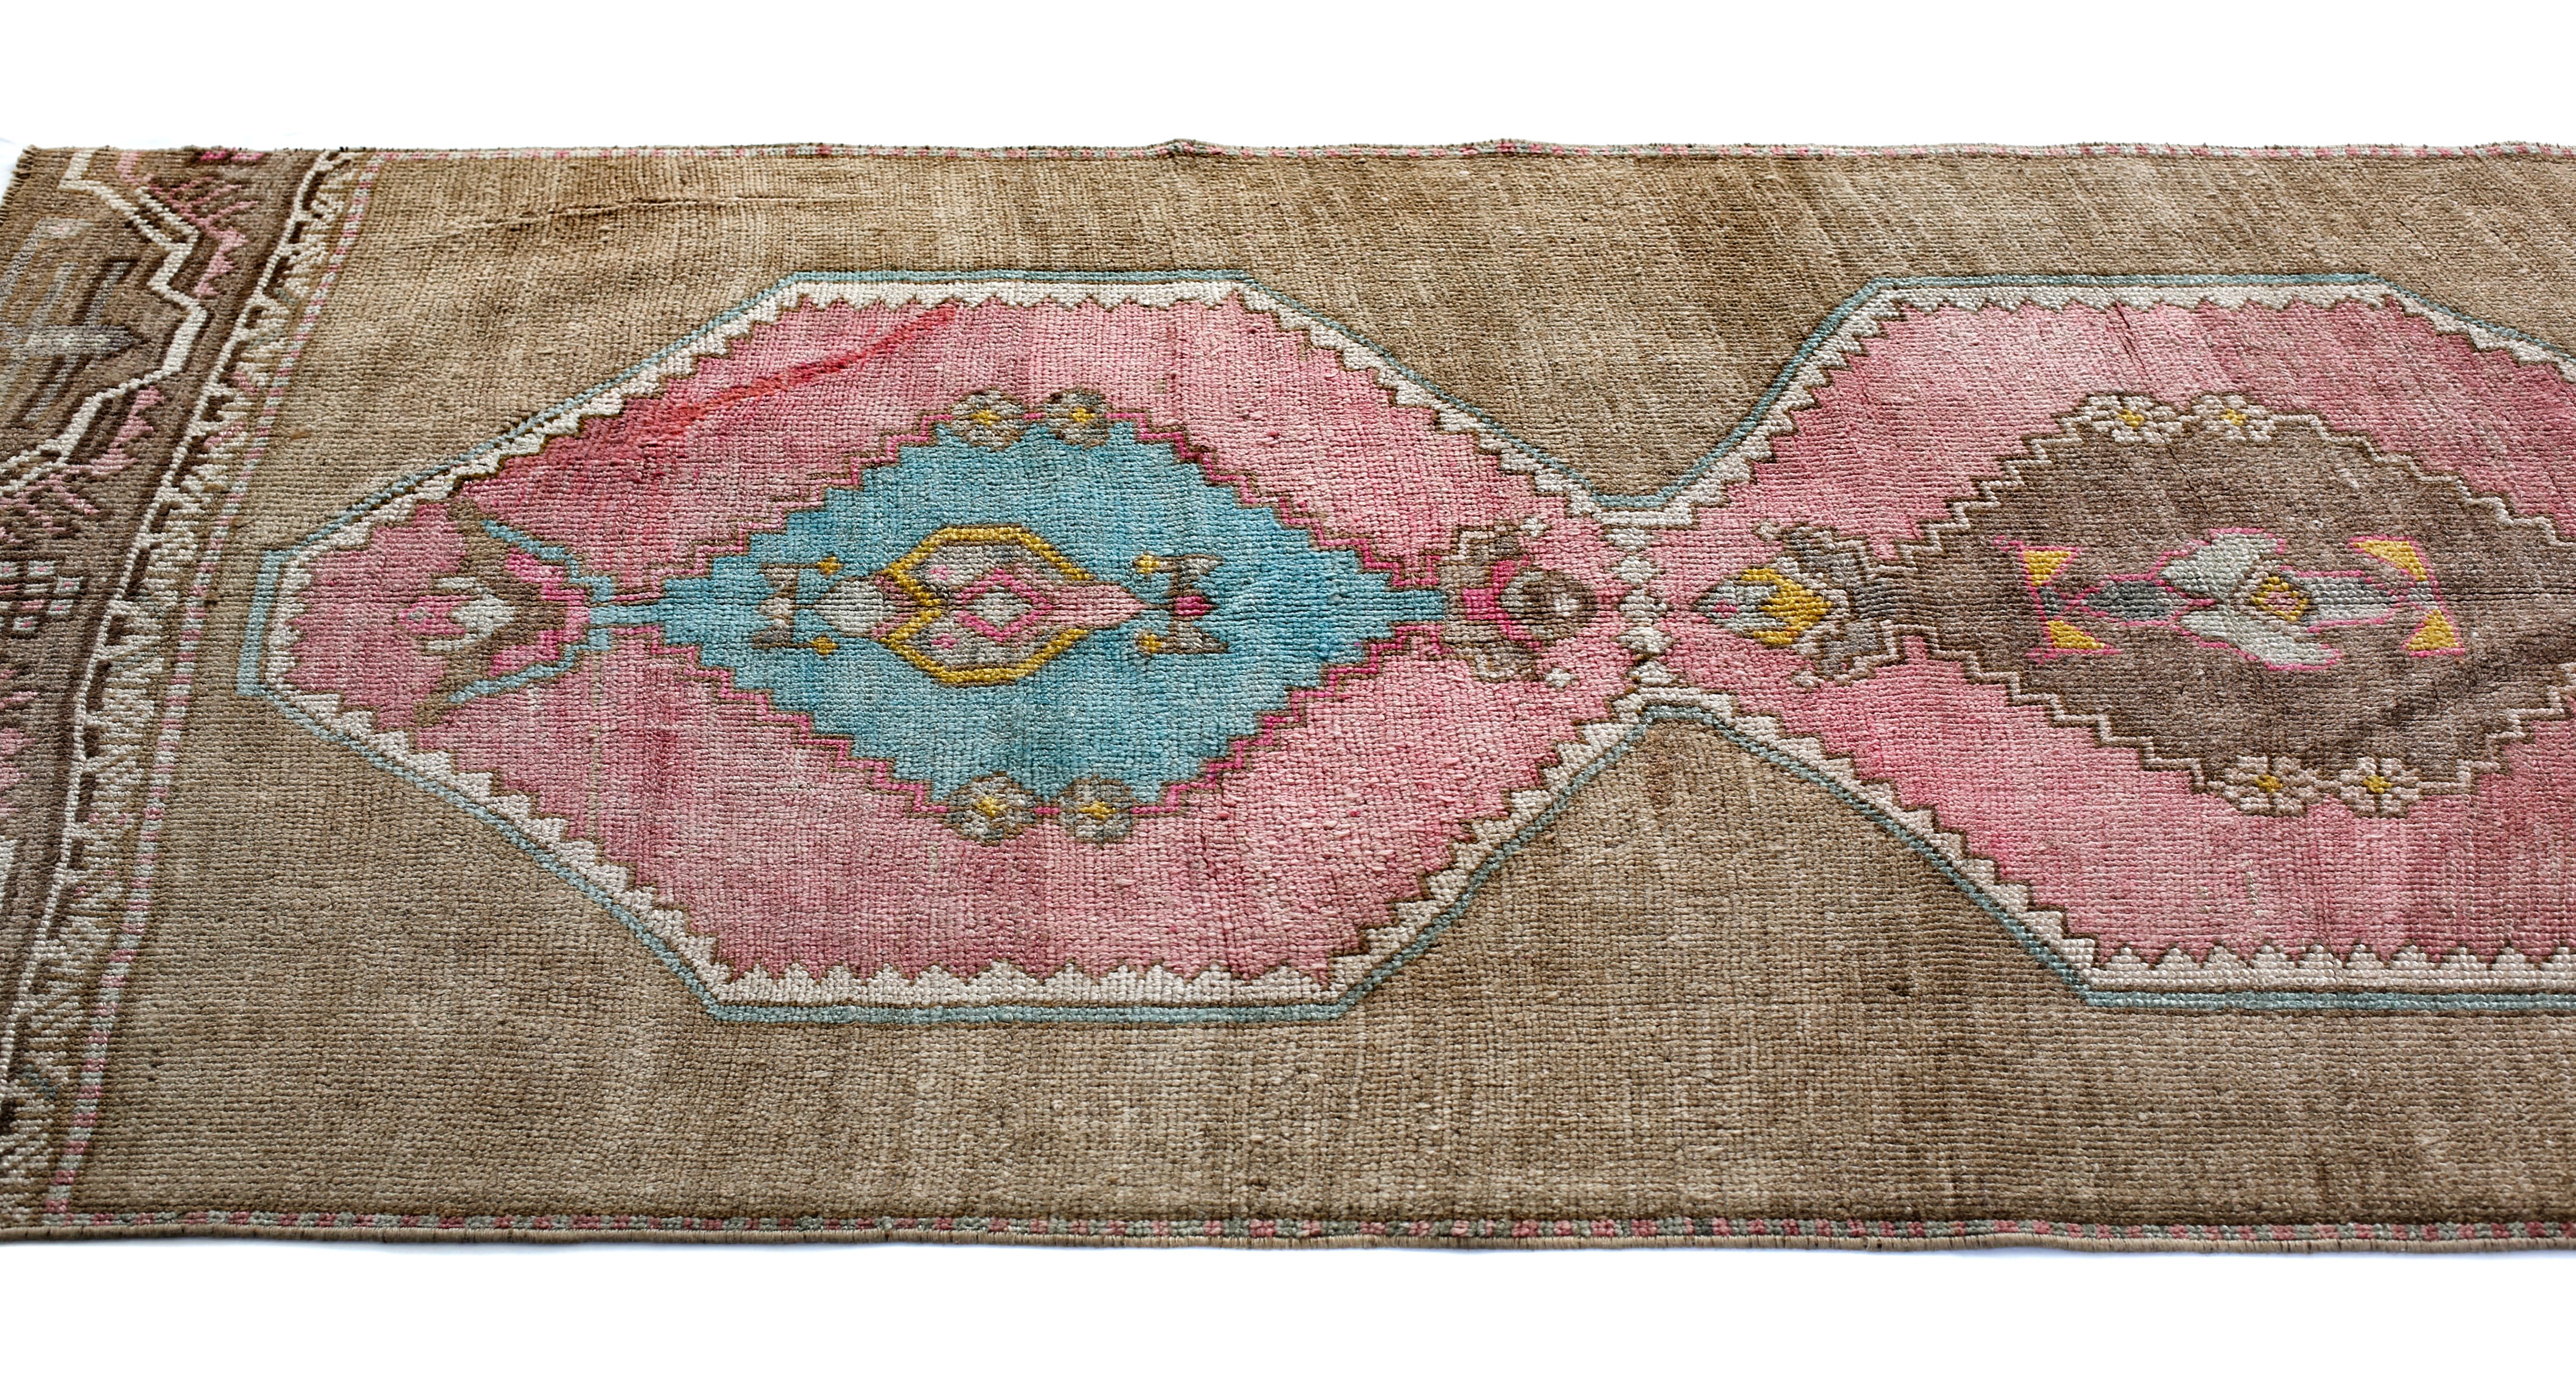 Anatolian rugs are hand knotted in the Central Anatolia or Asia Minor region of Turkey. The patterns are from Ottoman era as well as modern Turkey. The central medallion used in this rug symbolizes the central authority of the Ottoman Sultans. In